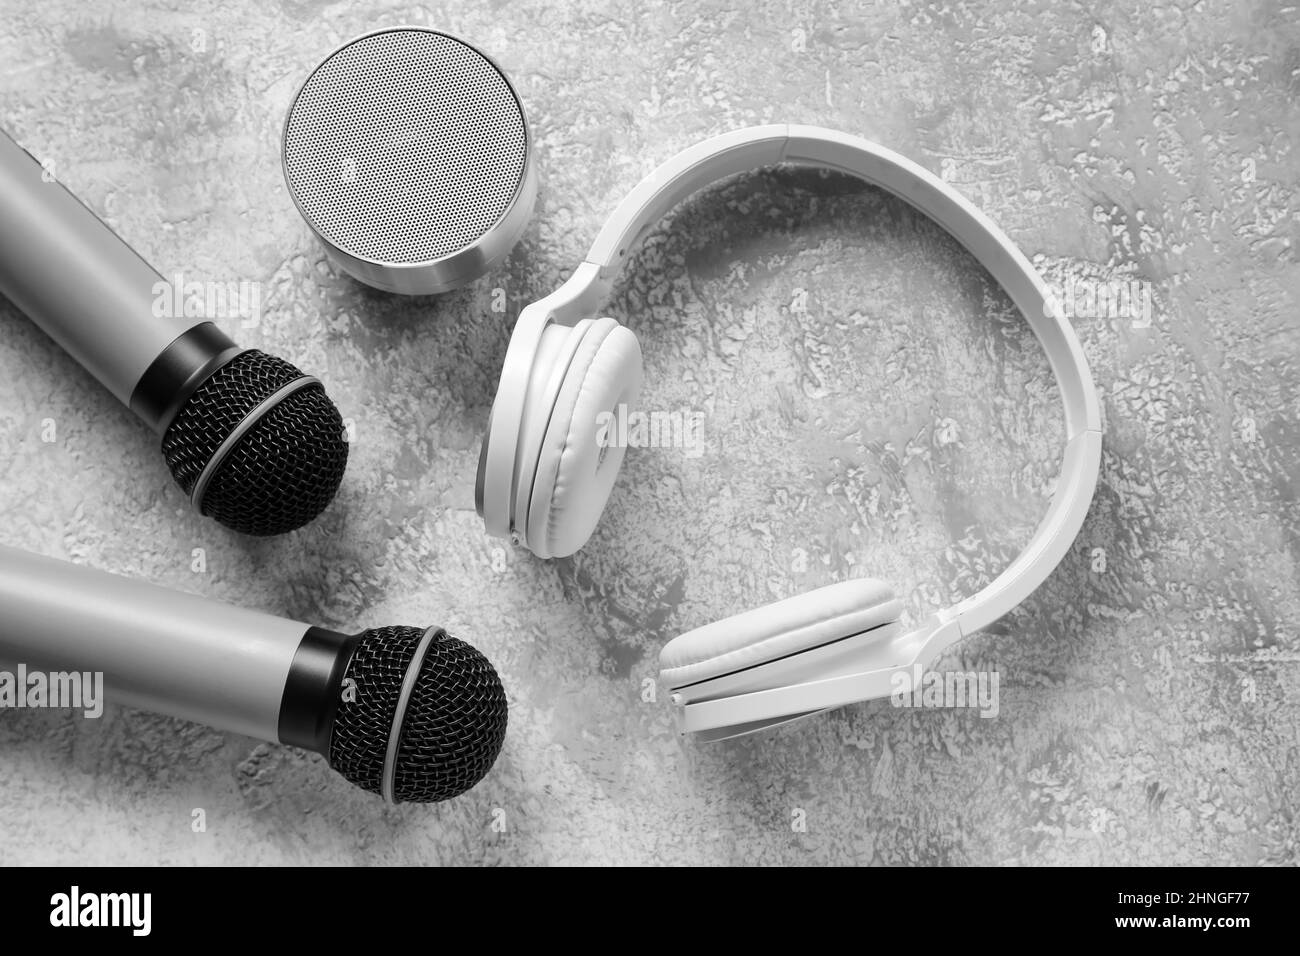 Wireless portable speaker, microphones and headphones on grunge background Stock Photo